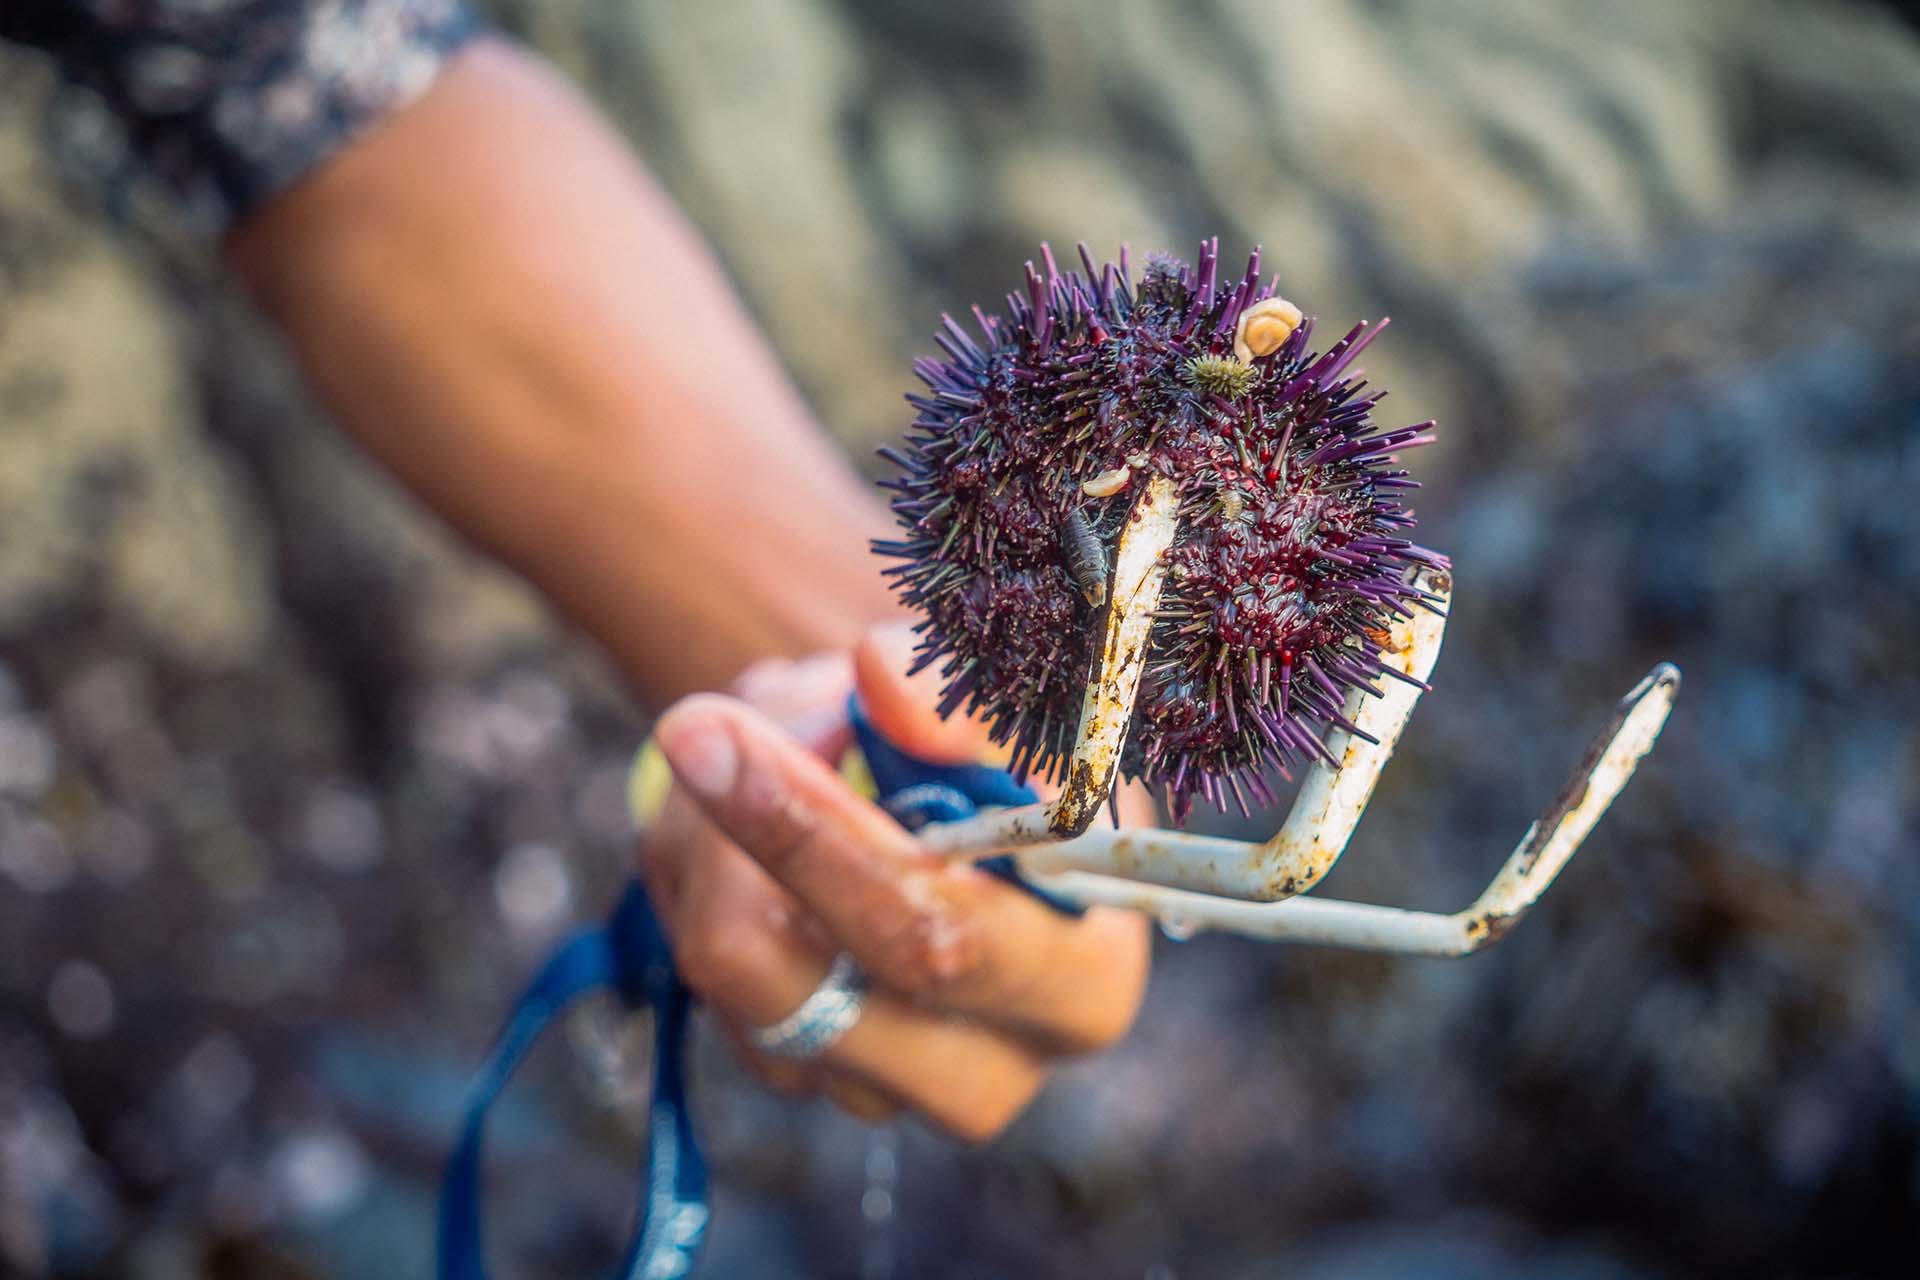 A purple sea urchin held up with a three-pronged garden tool.